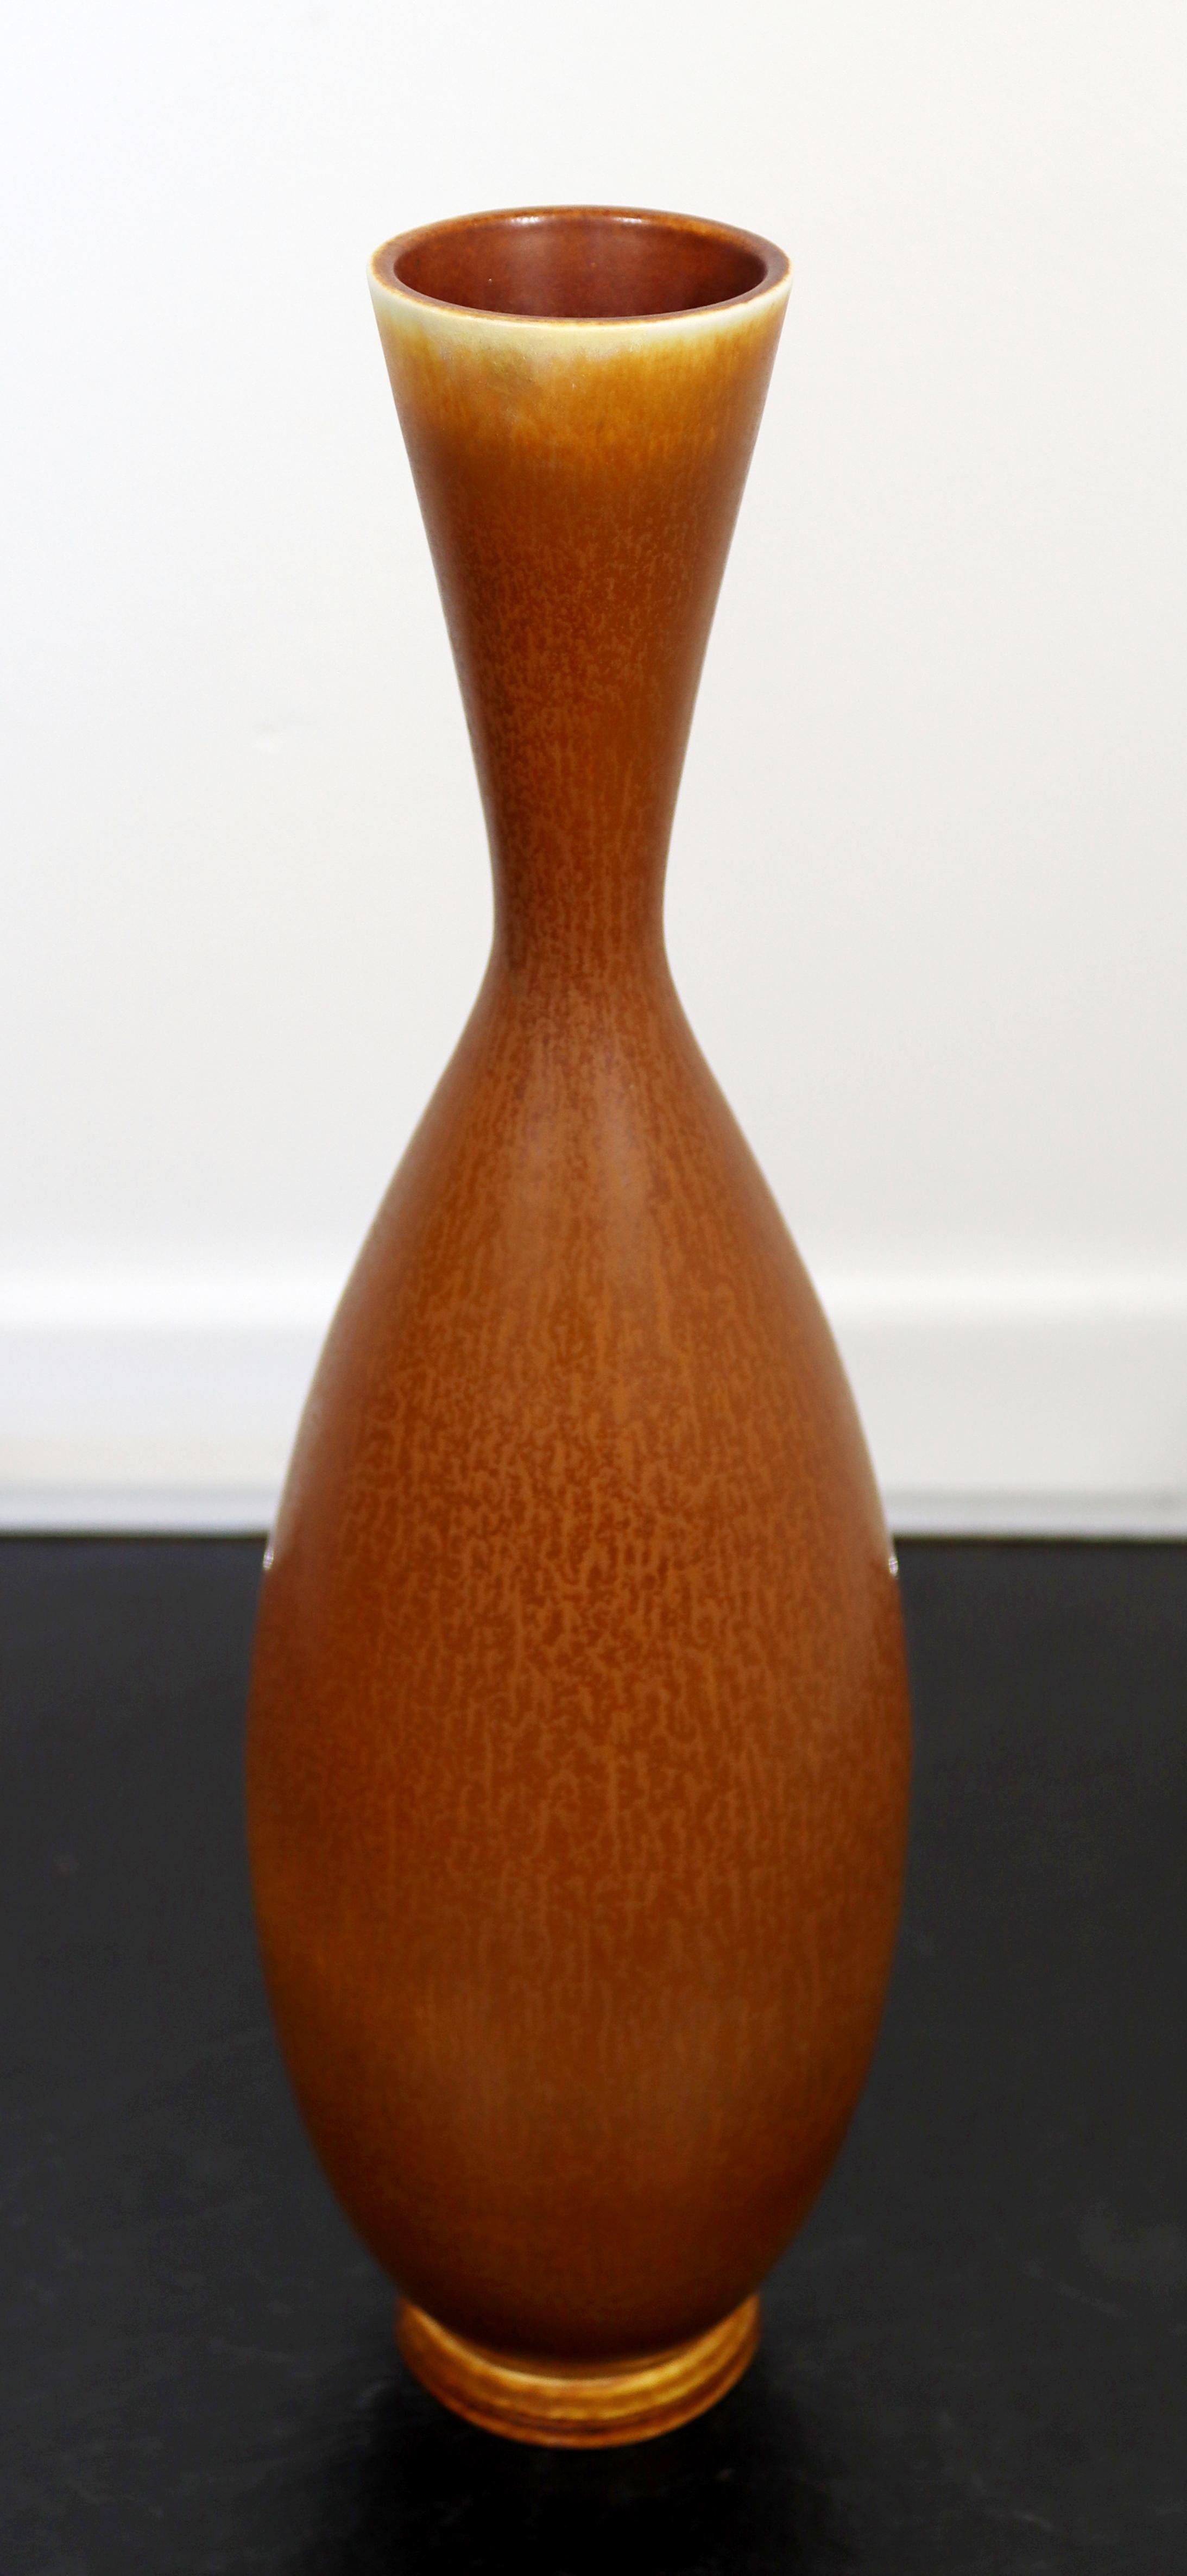 For your consideration is an incredible, ceramic vase, with a rusty brown hare's fur glaze, made in Sweden, both signed on the base by Berndt Friberg, circa the 1950s. In excellent condition. The dimensions are 3.5